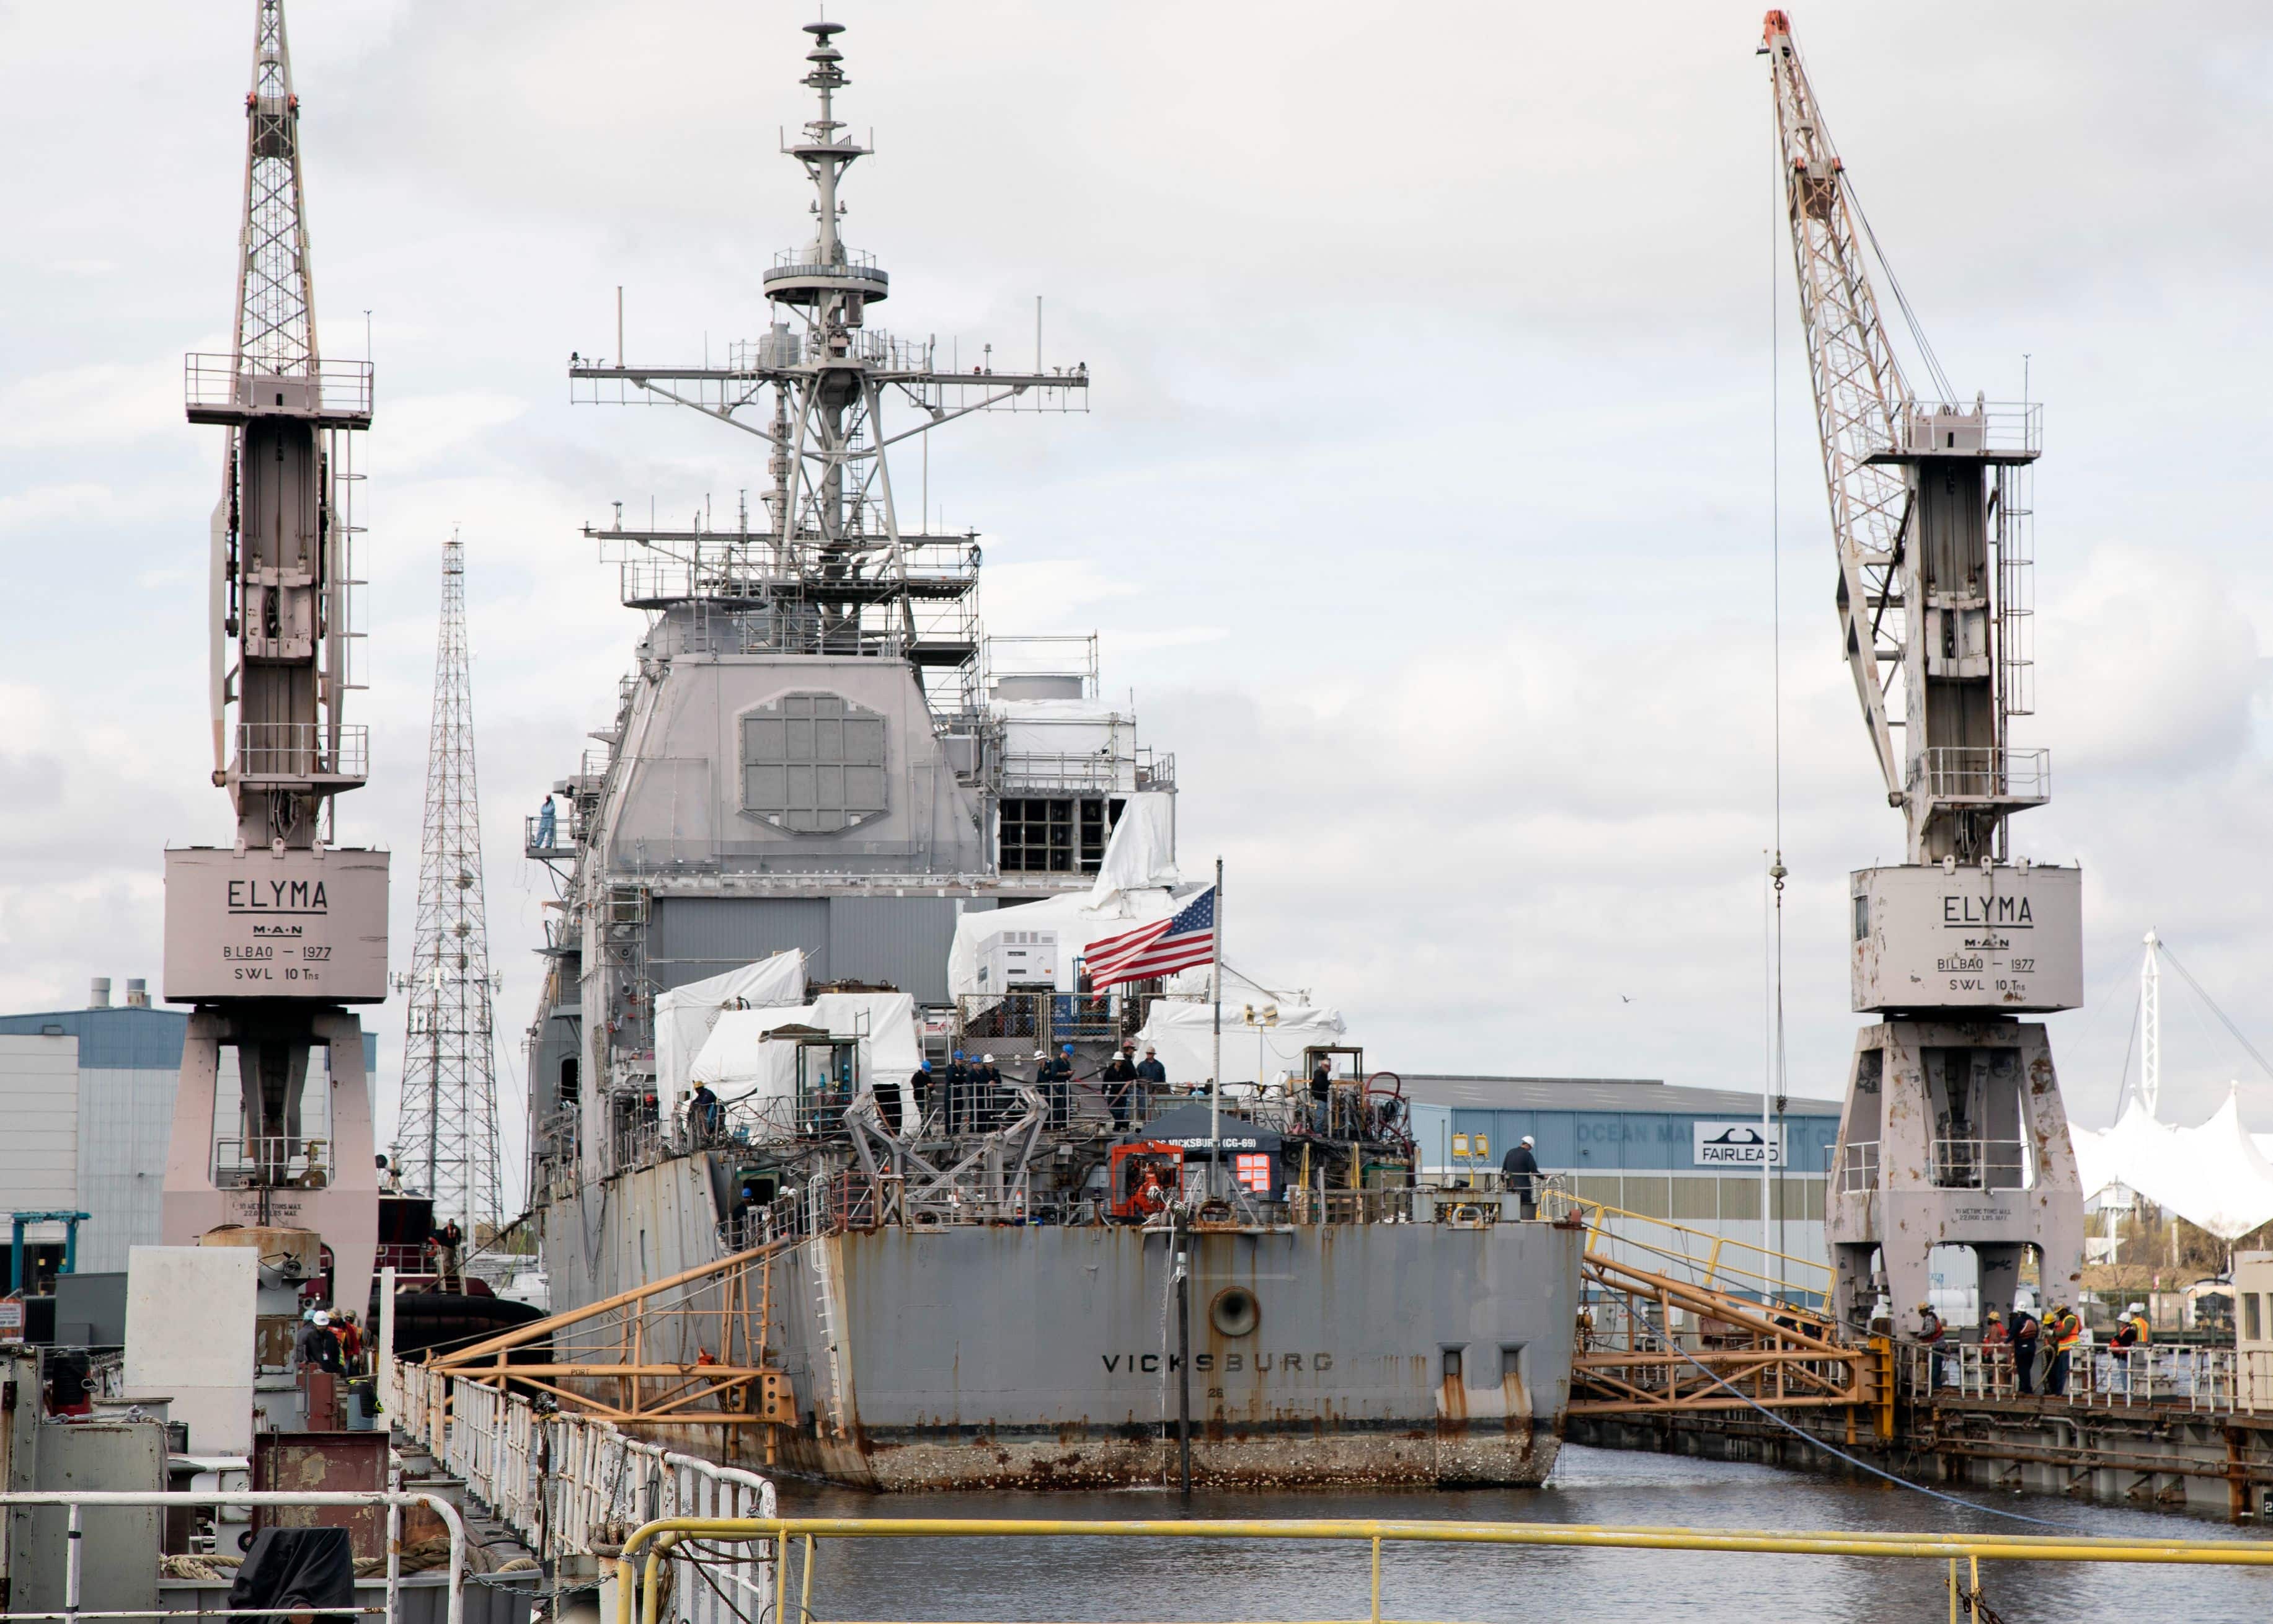 200324-N-KP445-1011 NORFOLK, VA (March 24, 2020) USS Vicksburg (CG 69) is maneuvered into a dry dock during a docking evolution at BAE Systems Shipyard in Norfolk, Virginia. Vicksburg is in the final phase of a Special Selected Restricted Availability (SSRA) as part of the Navy’s Guided Missile Cruiser/Landing Ship